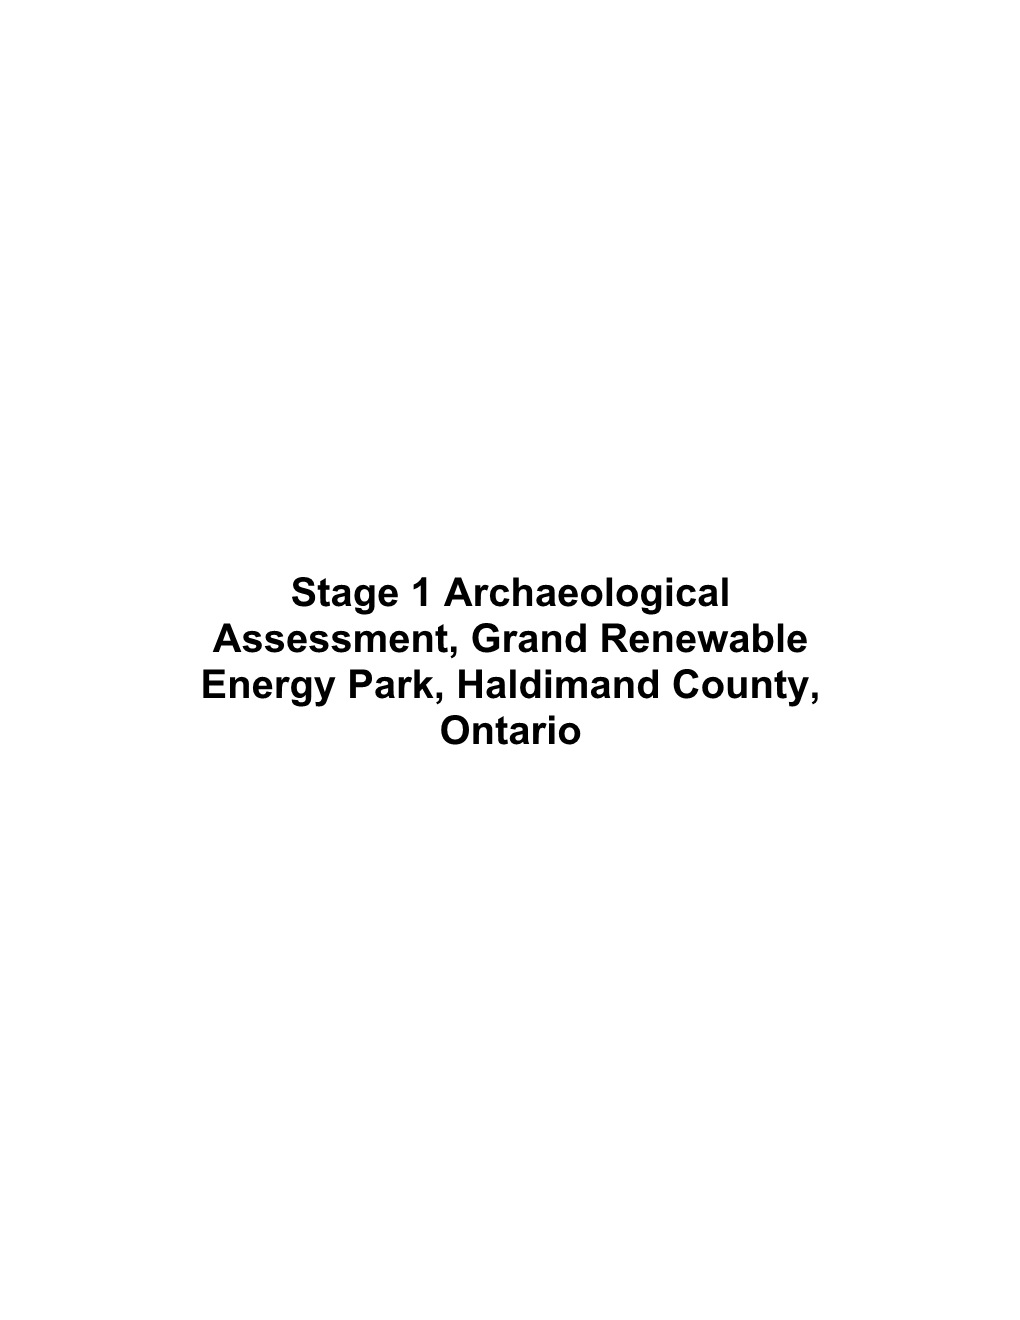 Stage 1 Archaeological Assessment, Grand Renewable Energy Park